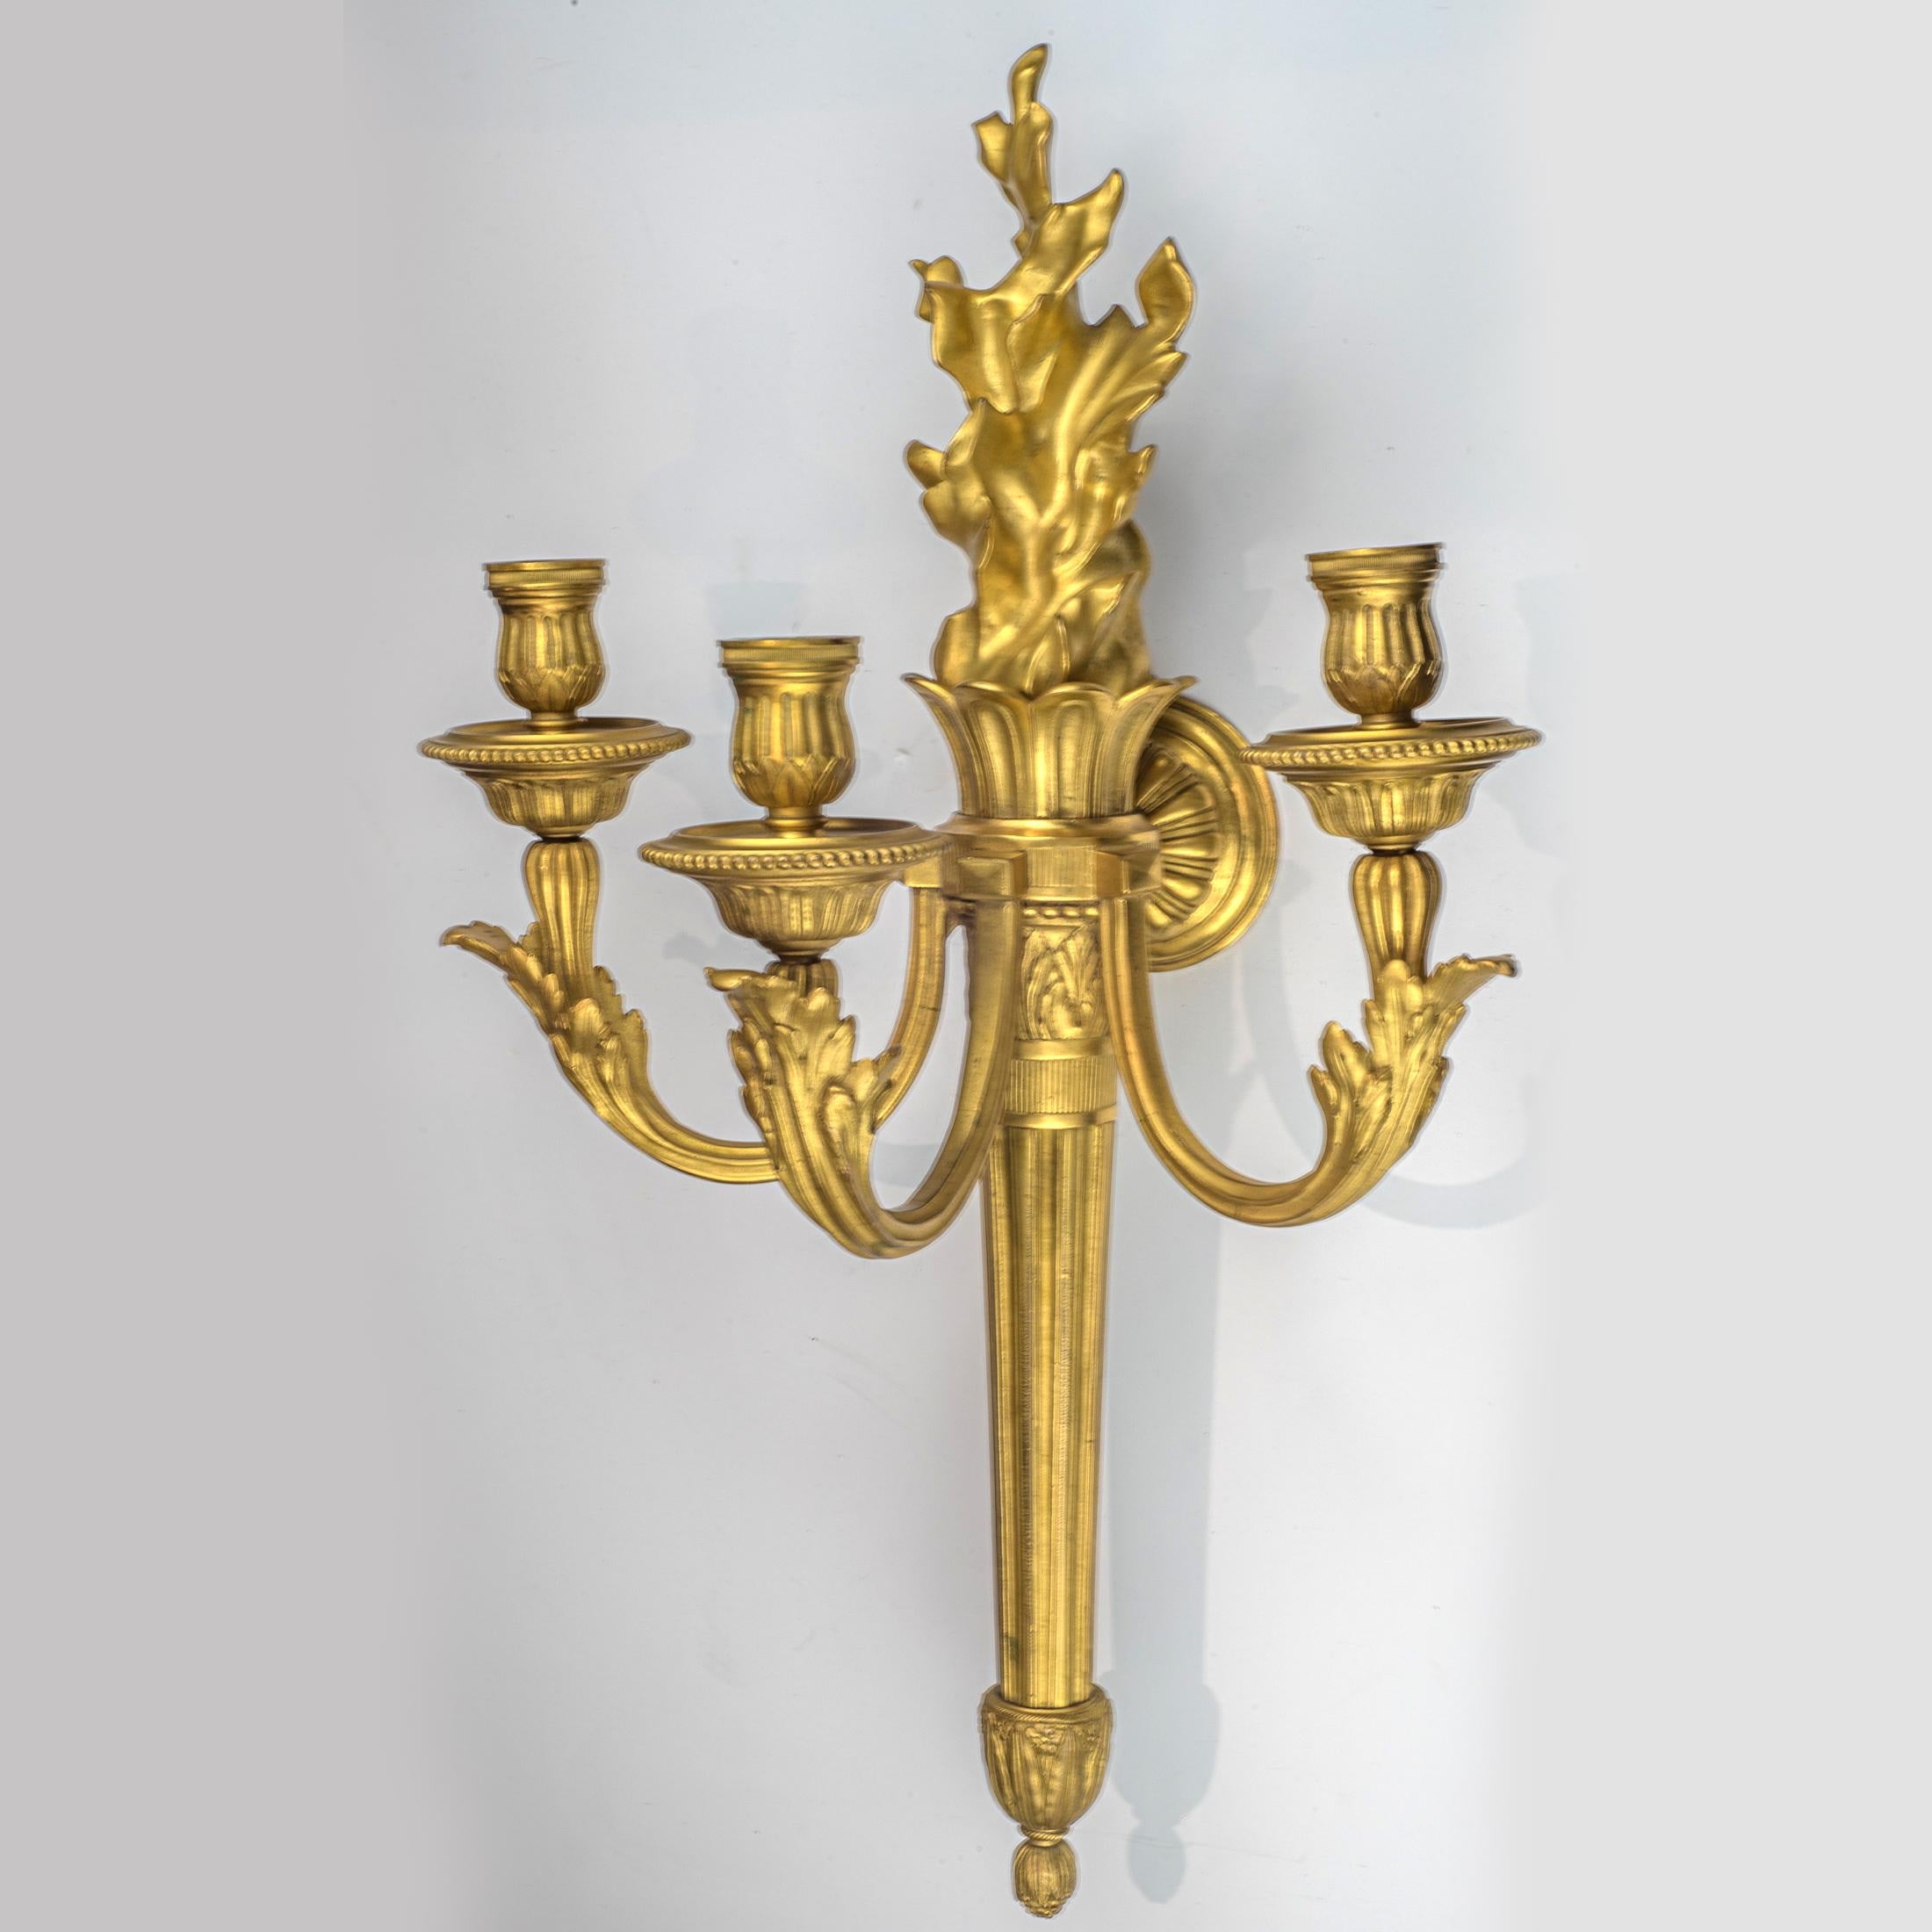 A fine quality pair of Louis XVI Style three-light gilt bronze wall sconces after the well known model by Jean-Louis Prieur, Paris. The gilt bronze elements variously impressed EM, numbered and with the mark BY. Signed 'E. MOTTHEAU, PARIS'

Maker: